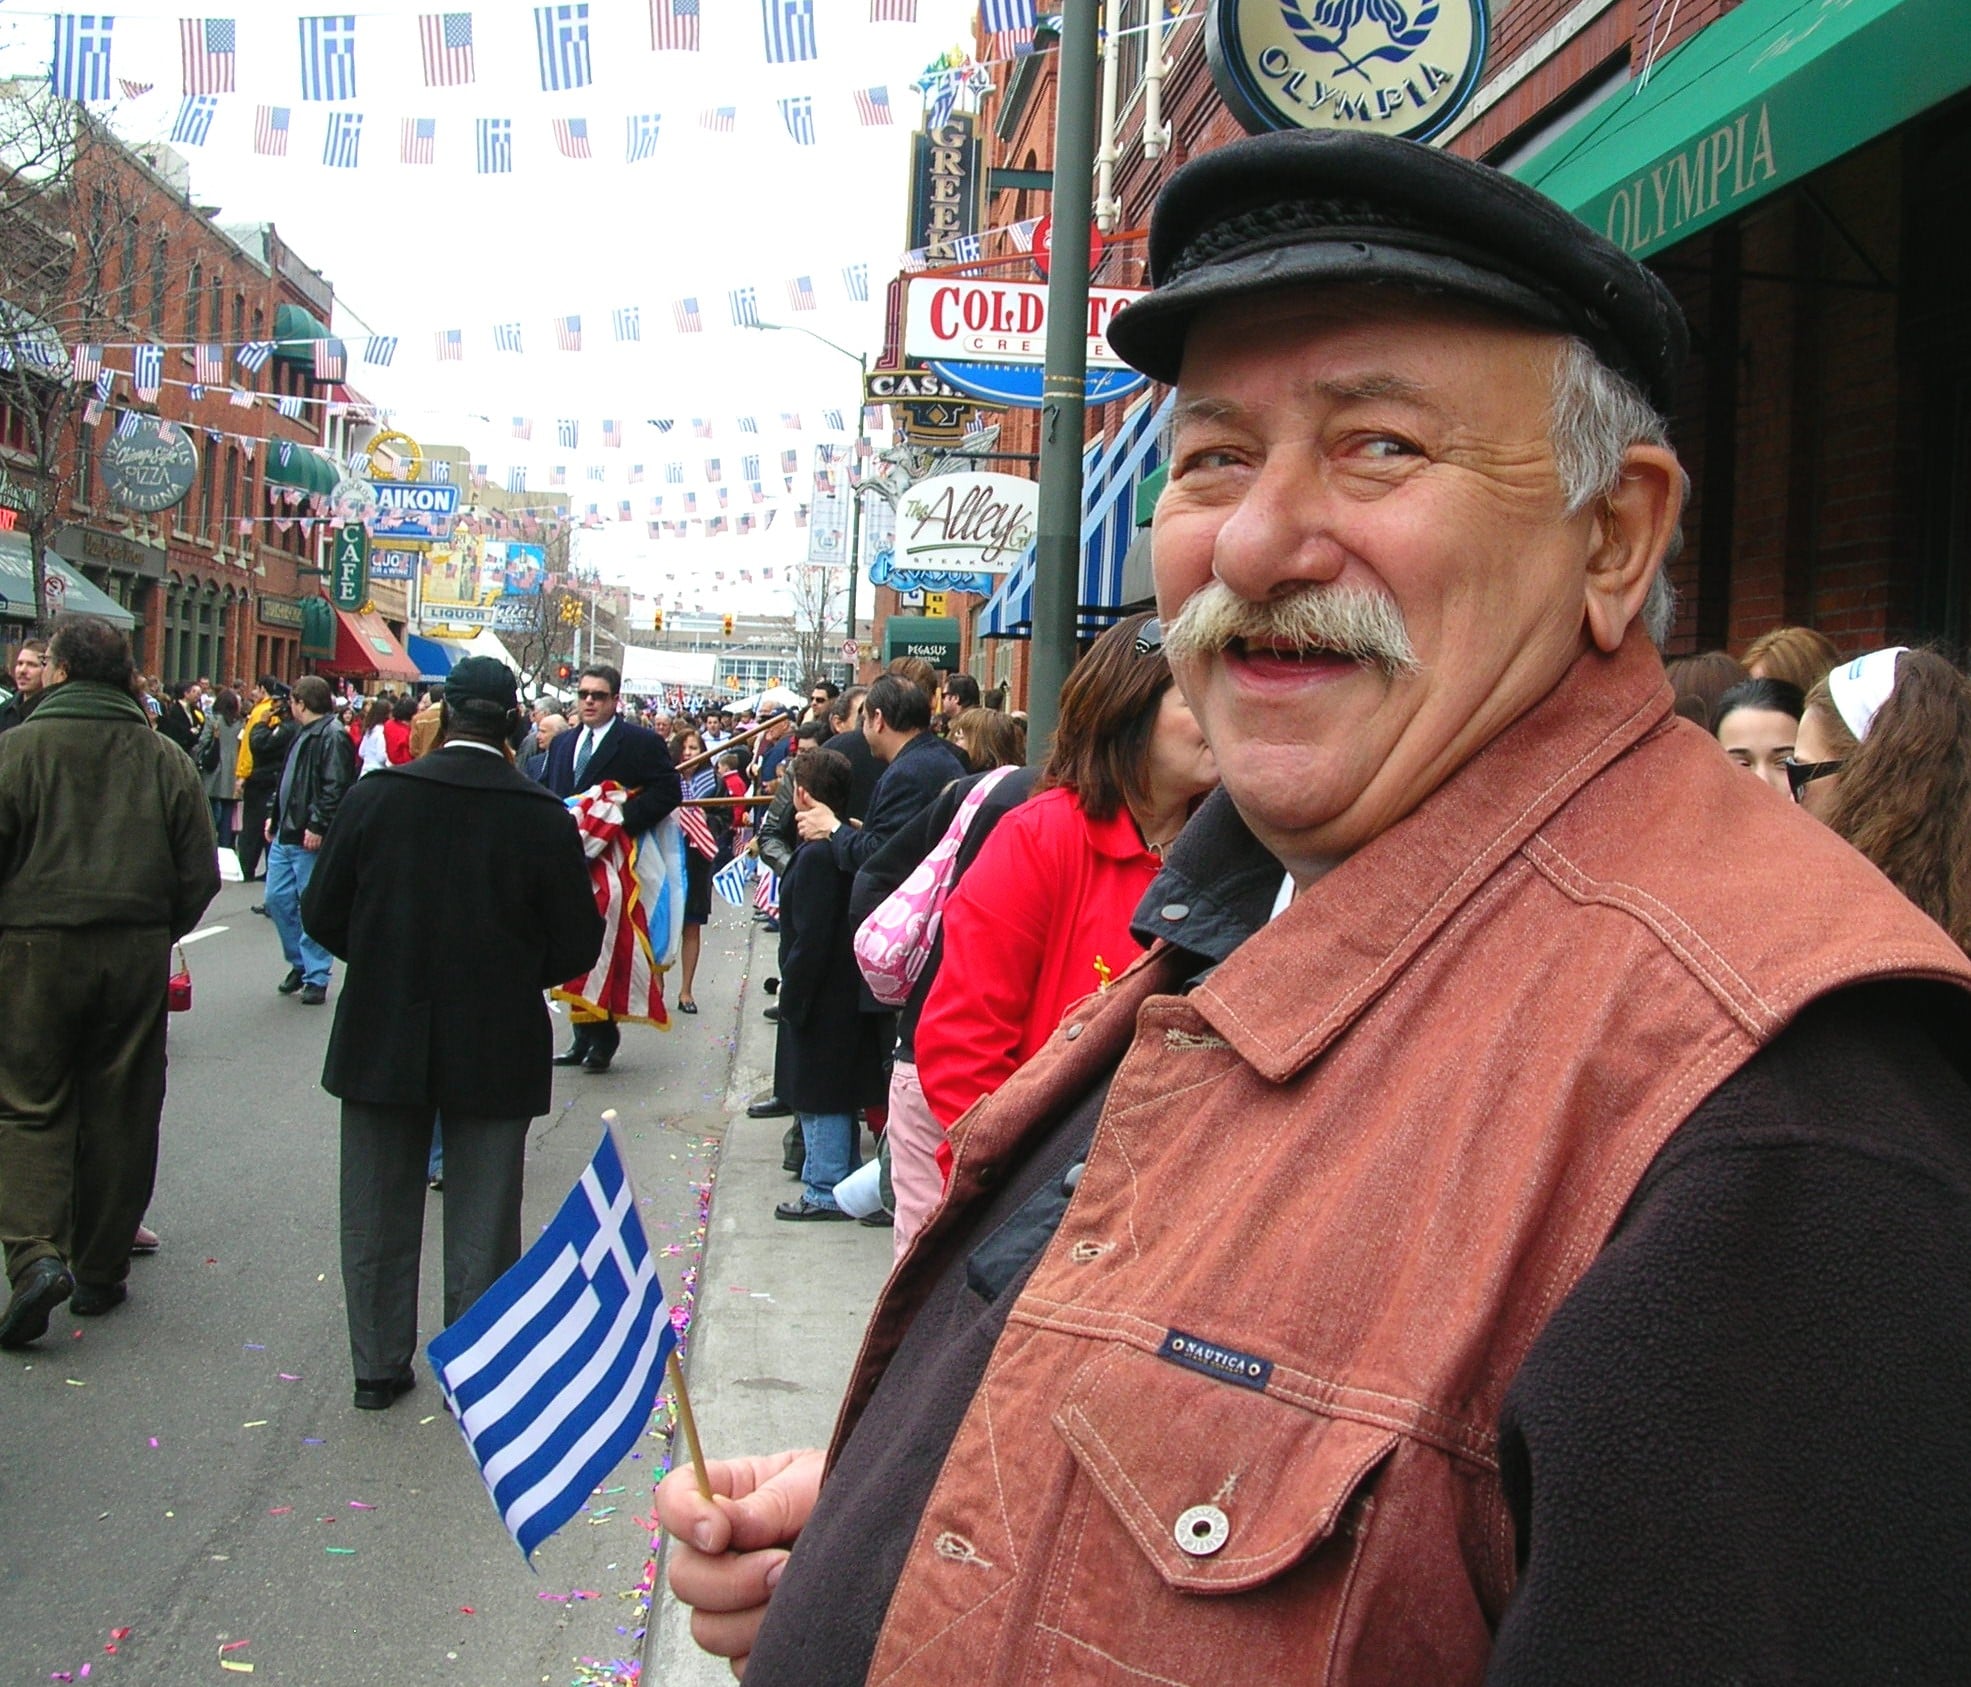 Man watching the Greek Independence Day Parade in Detroit’s Greektown -- displays a Greek flag.